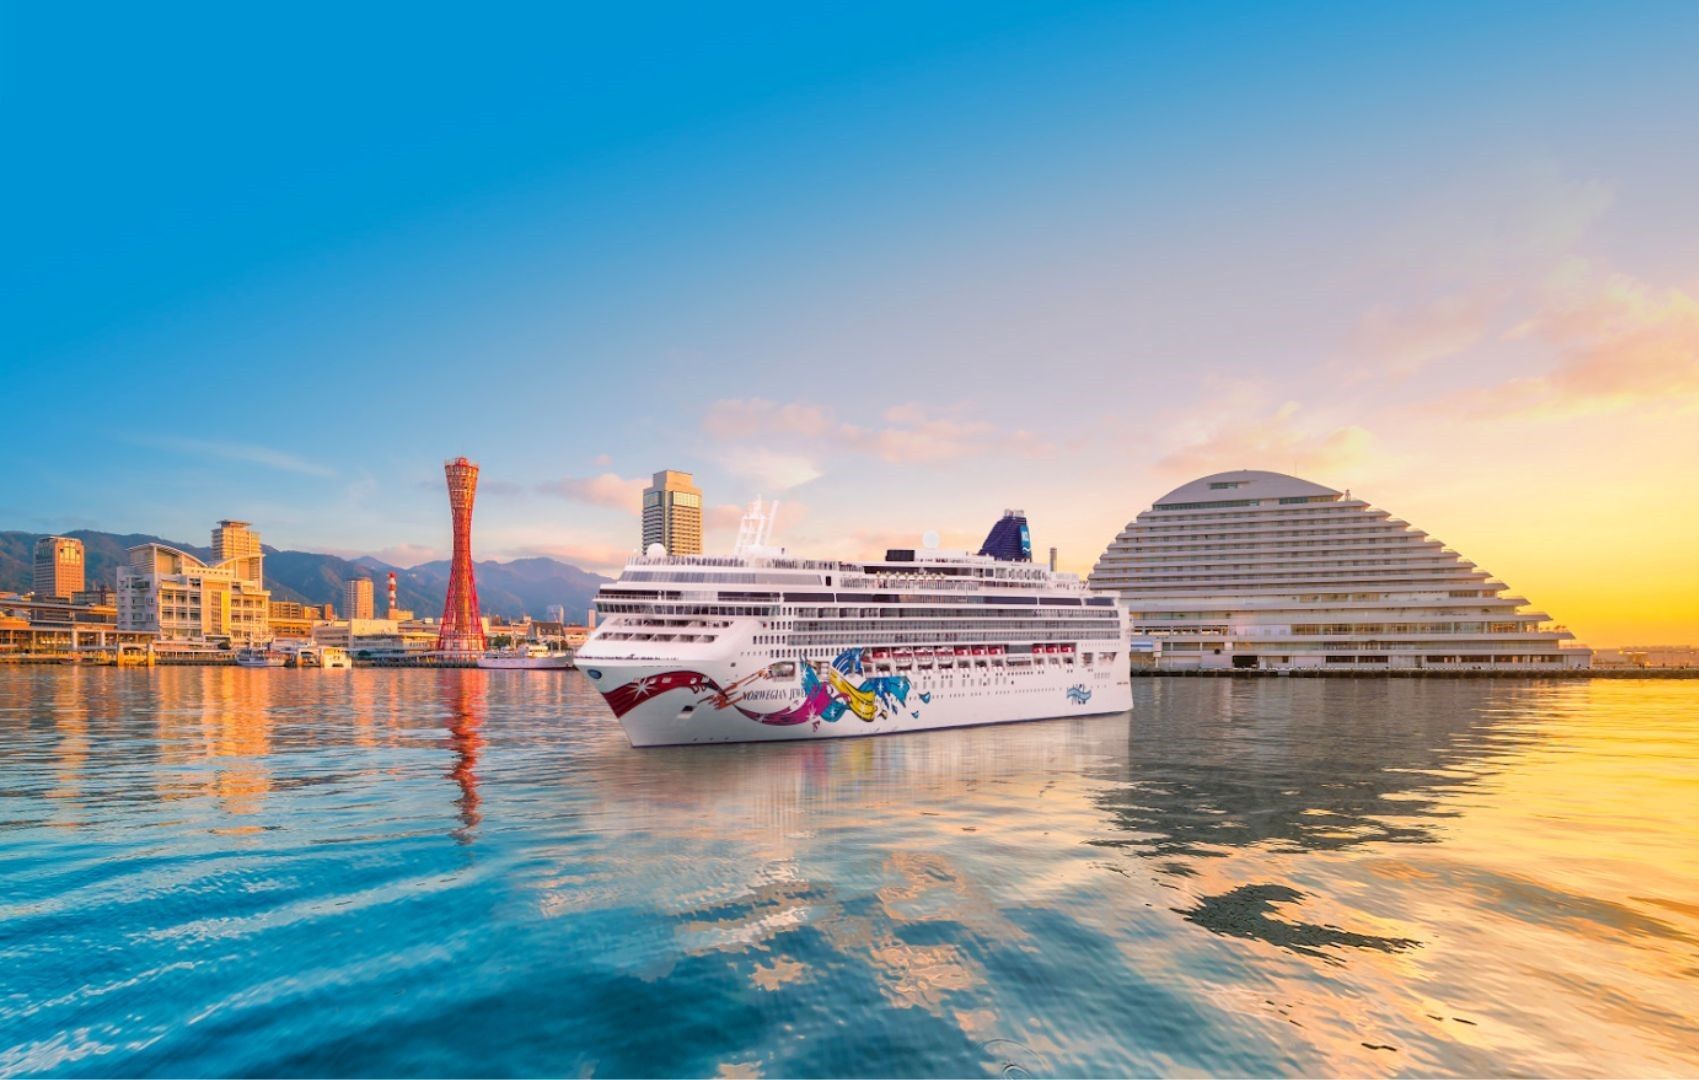 Norwegian Cruise Line returning to Asia after 3 years, makes first calls to the Philippines